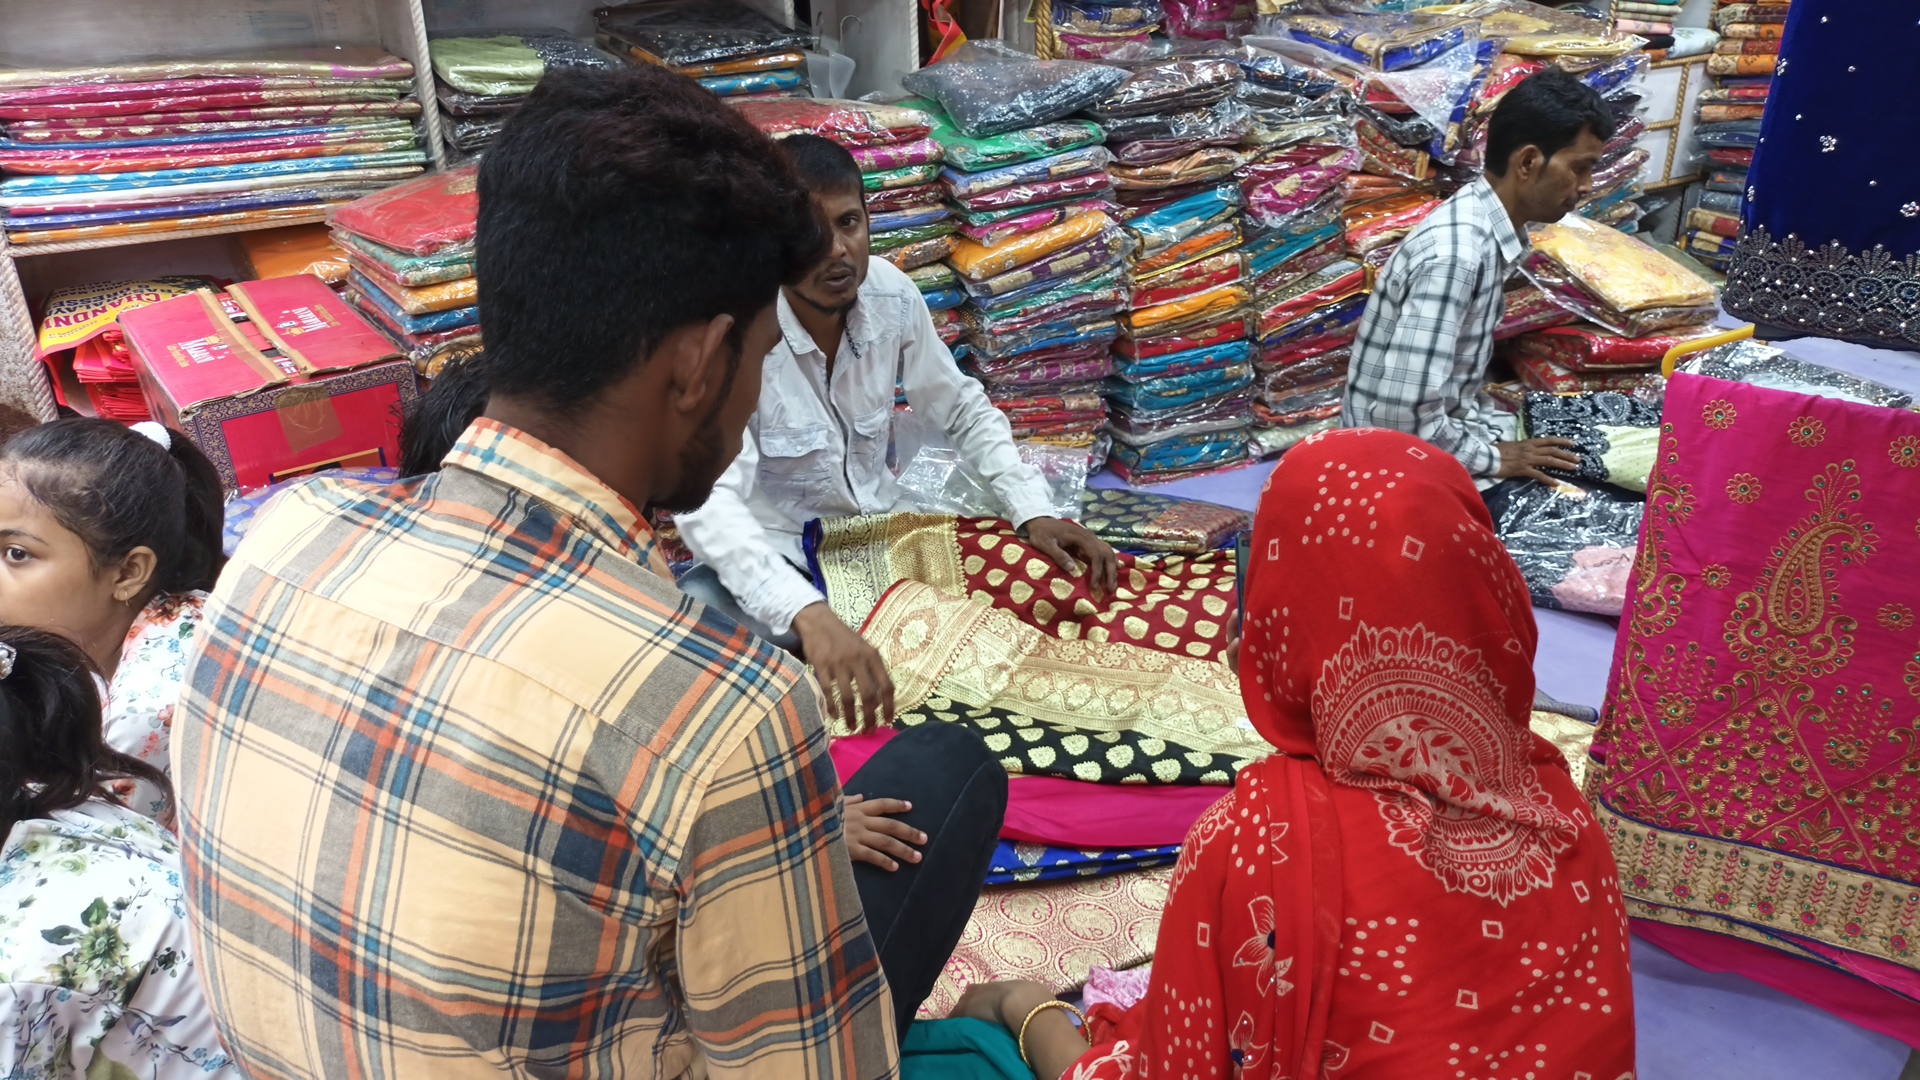 Price Rise Effects Textile Business of Kalichak Market in Eid